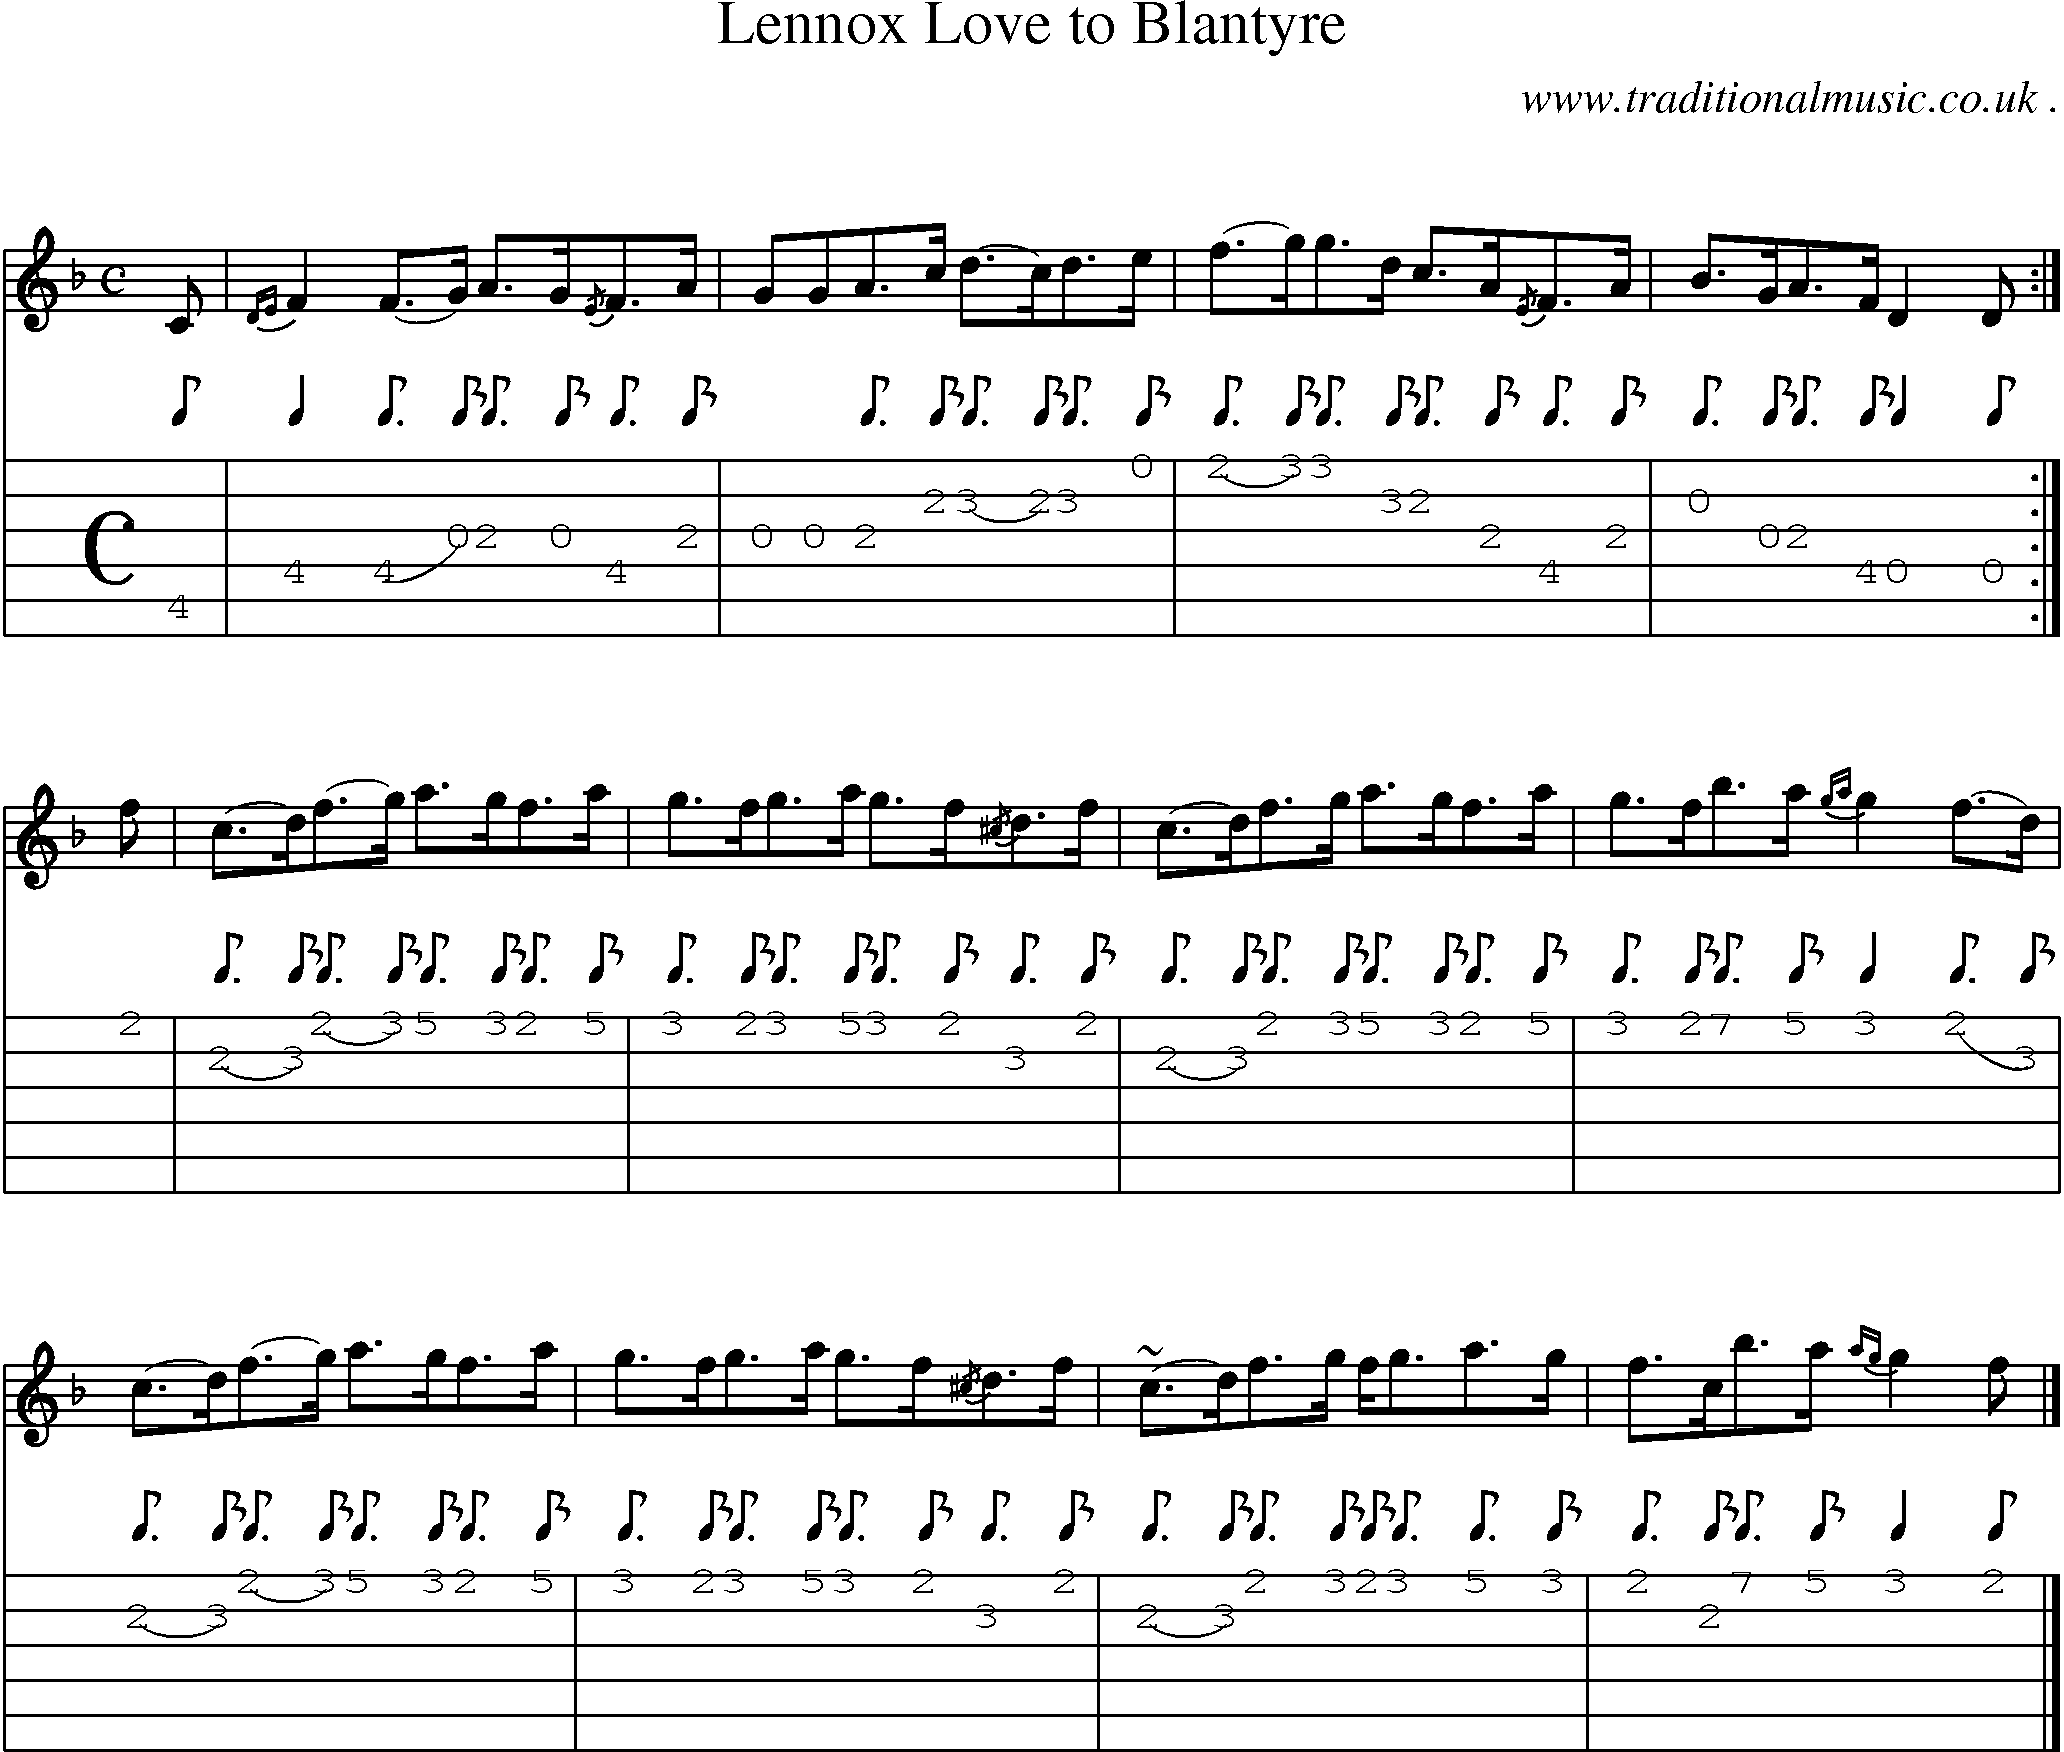 Sheet-music  score, Chords and Guitar Tabs for Lennox Love To Blantyre